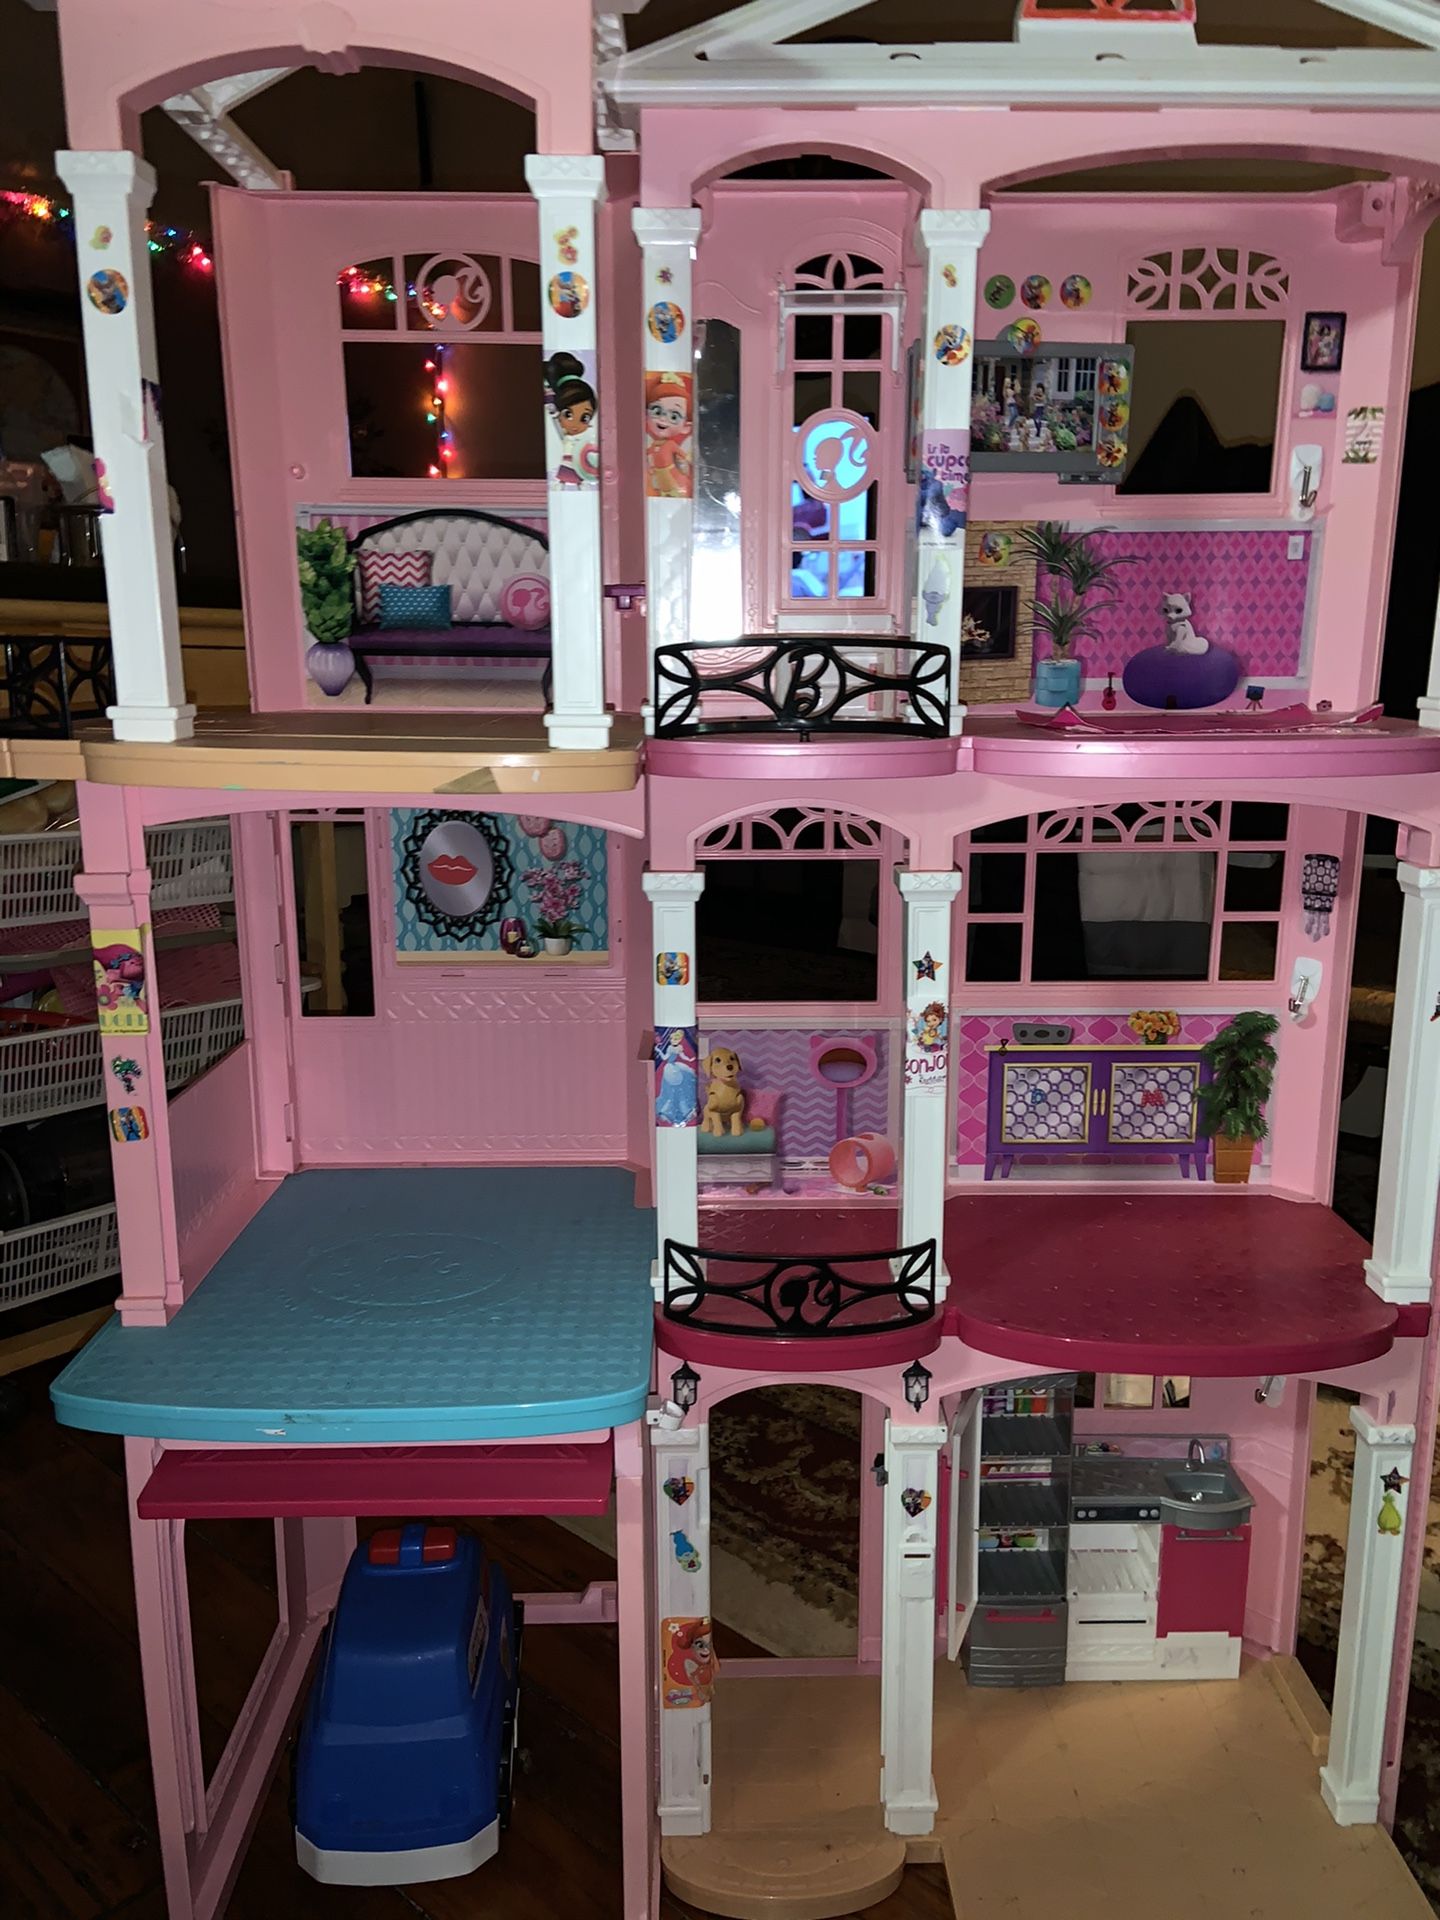 Barbie dream house height 4 feet and 3 feet wide only the house.